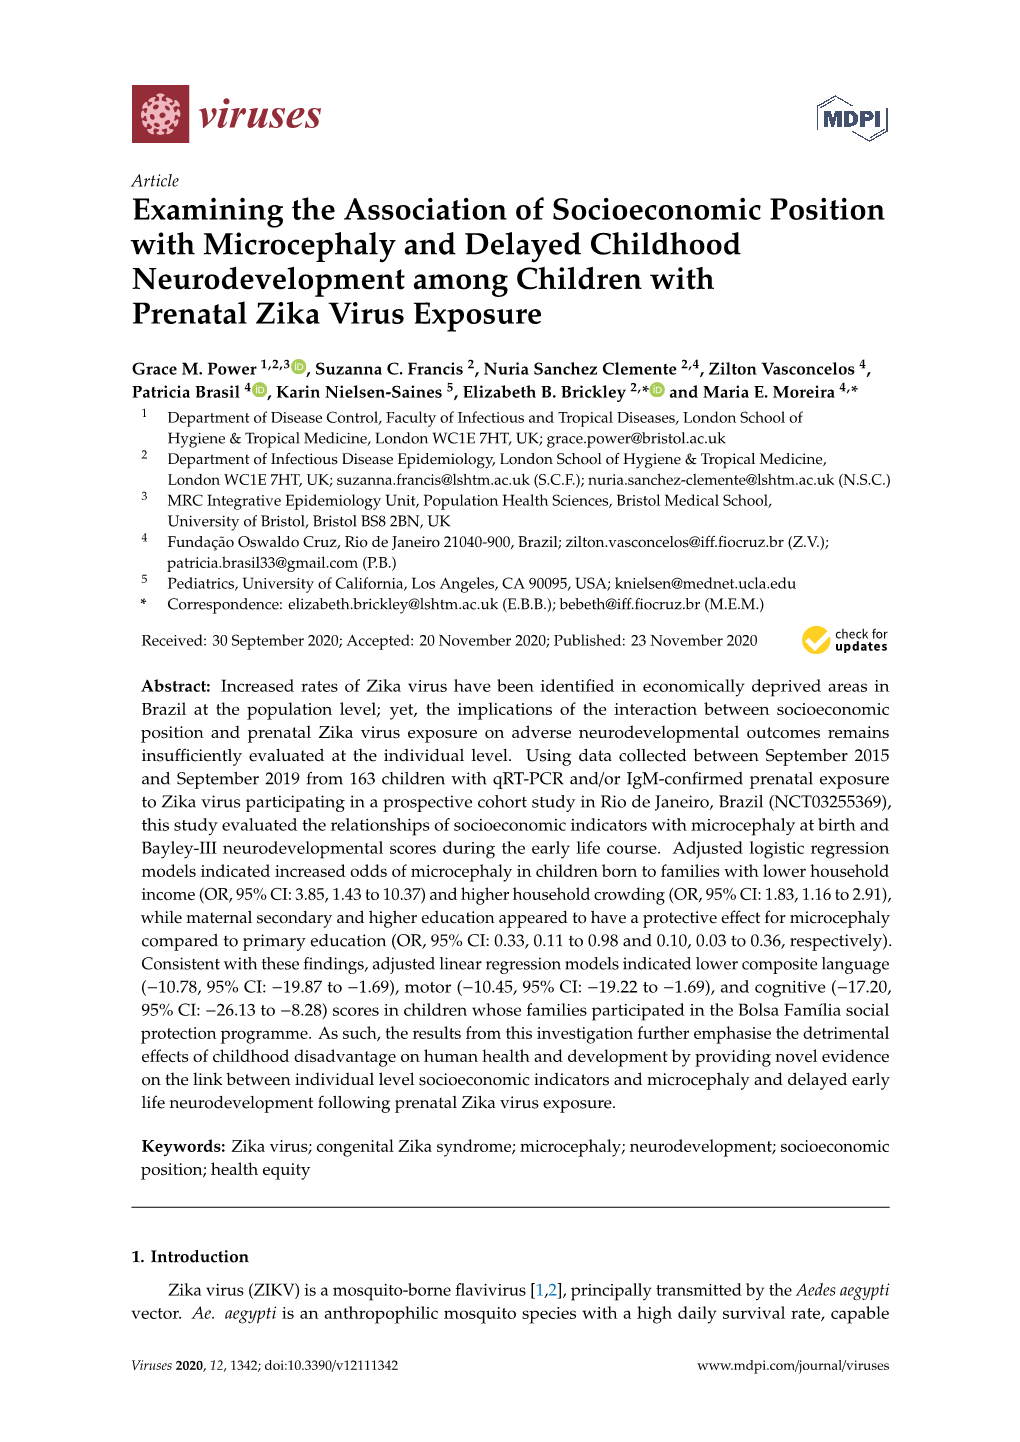 Examining the Association of Socioeconomic Position with Microcephaly and Delayed Childhood Neurodevelopment Among Children with Prenatal Zika Virus Exposure